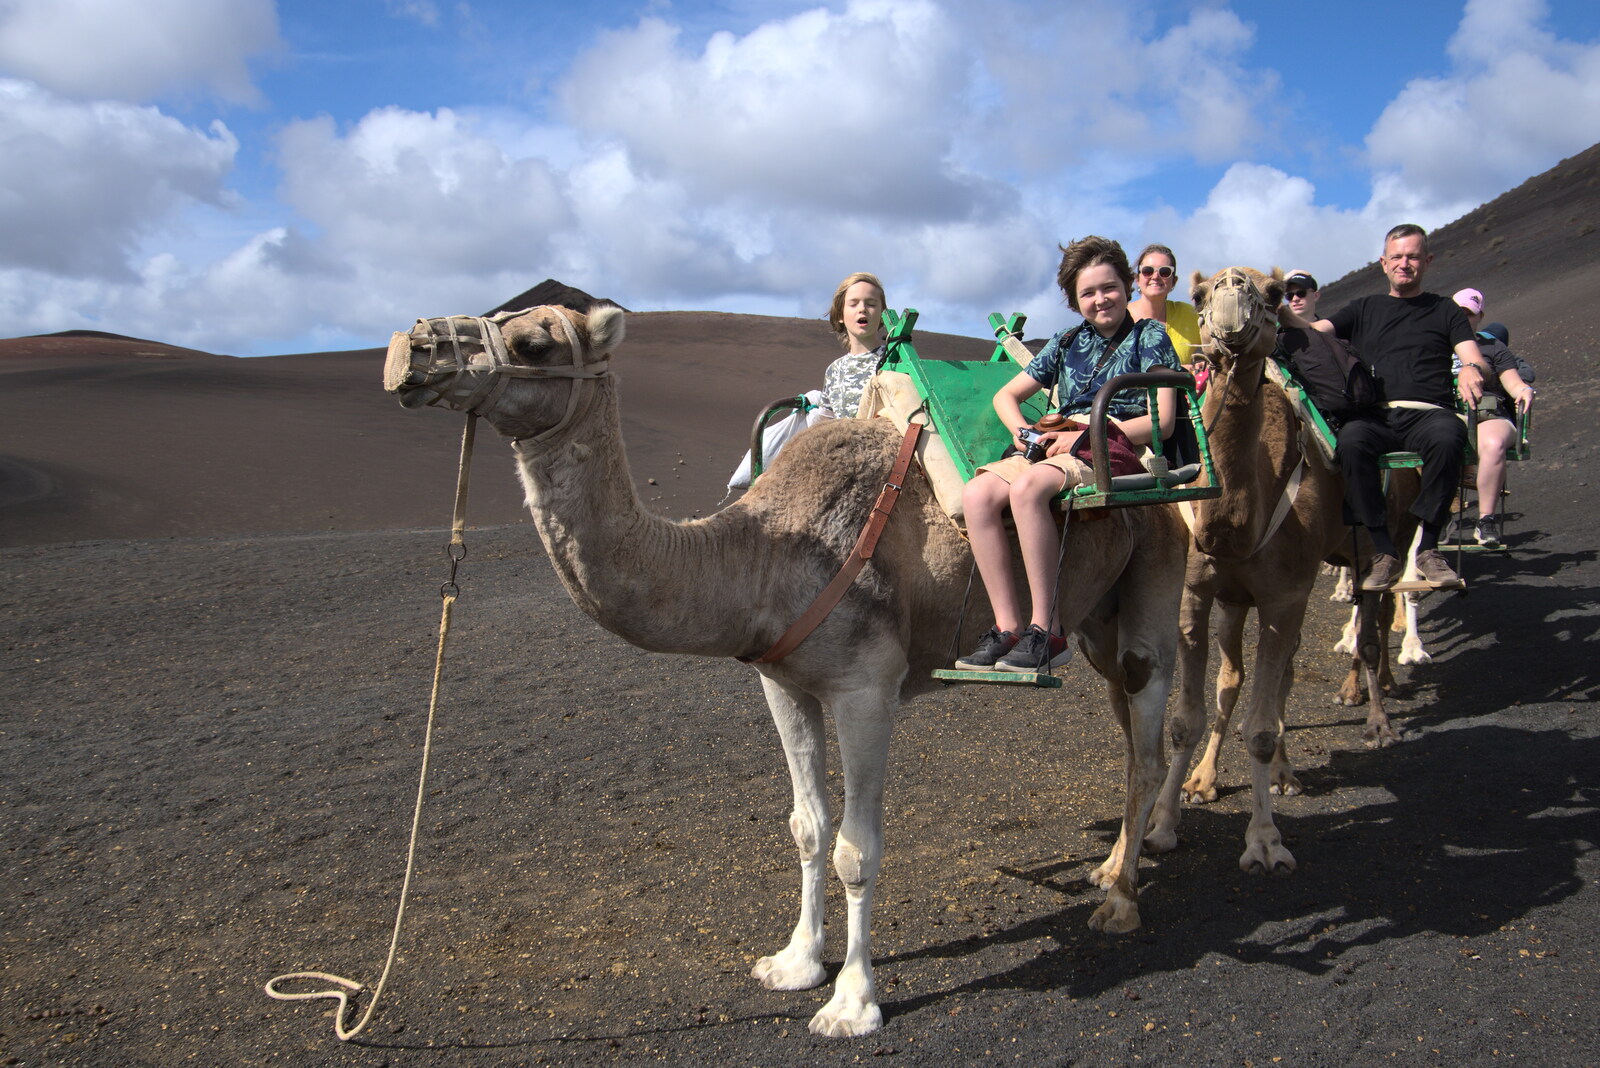 A family photo from The Volcanoes of Lanzarote, Canary Islands, Spain - 27th October 2021